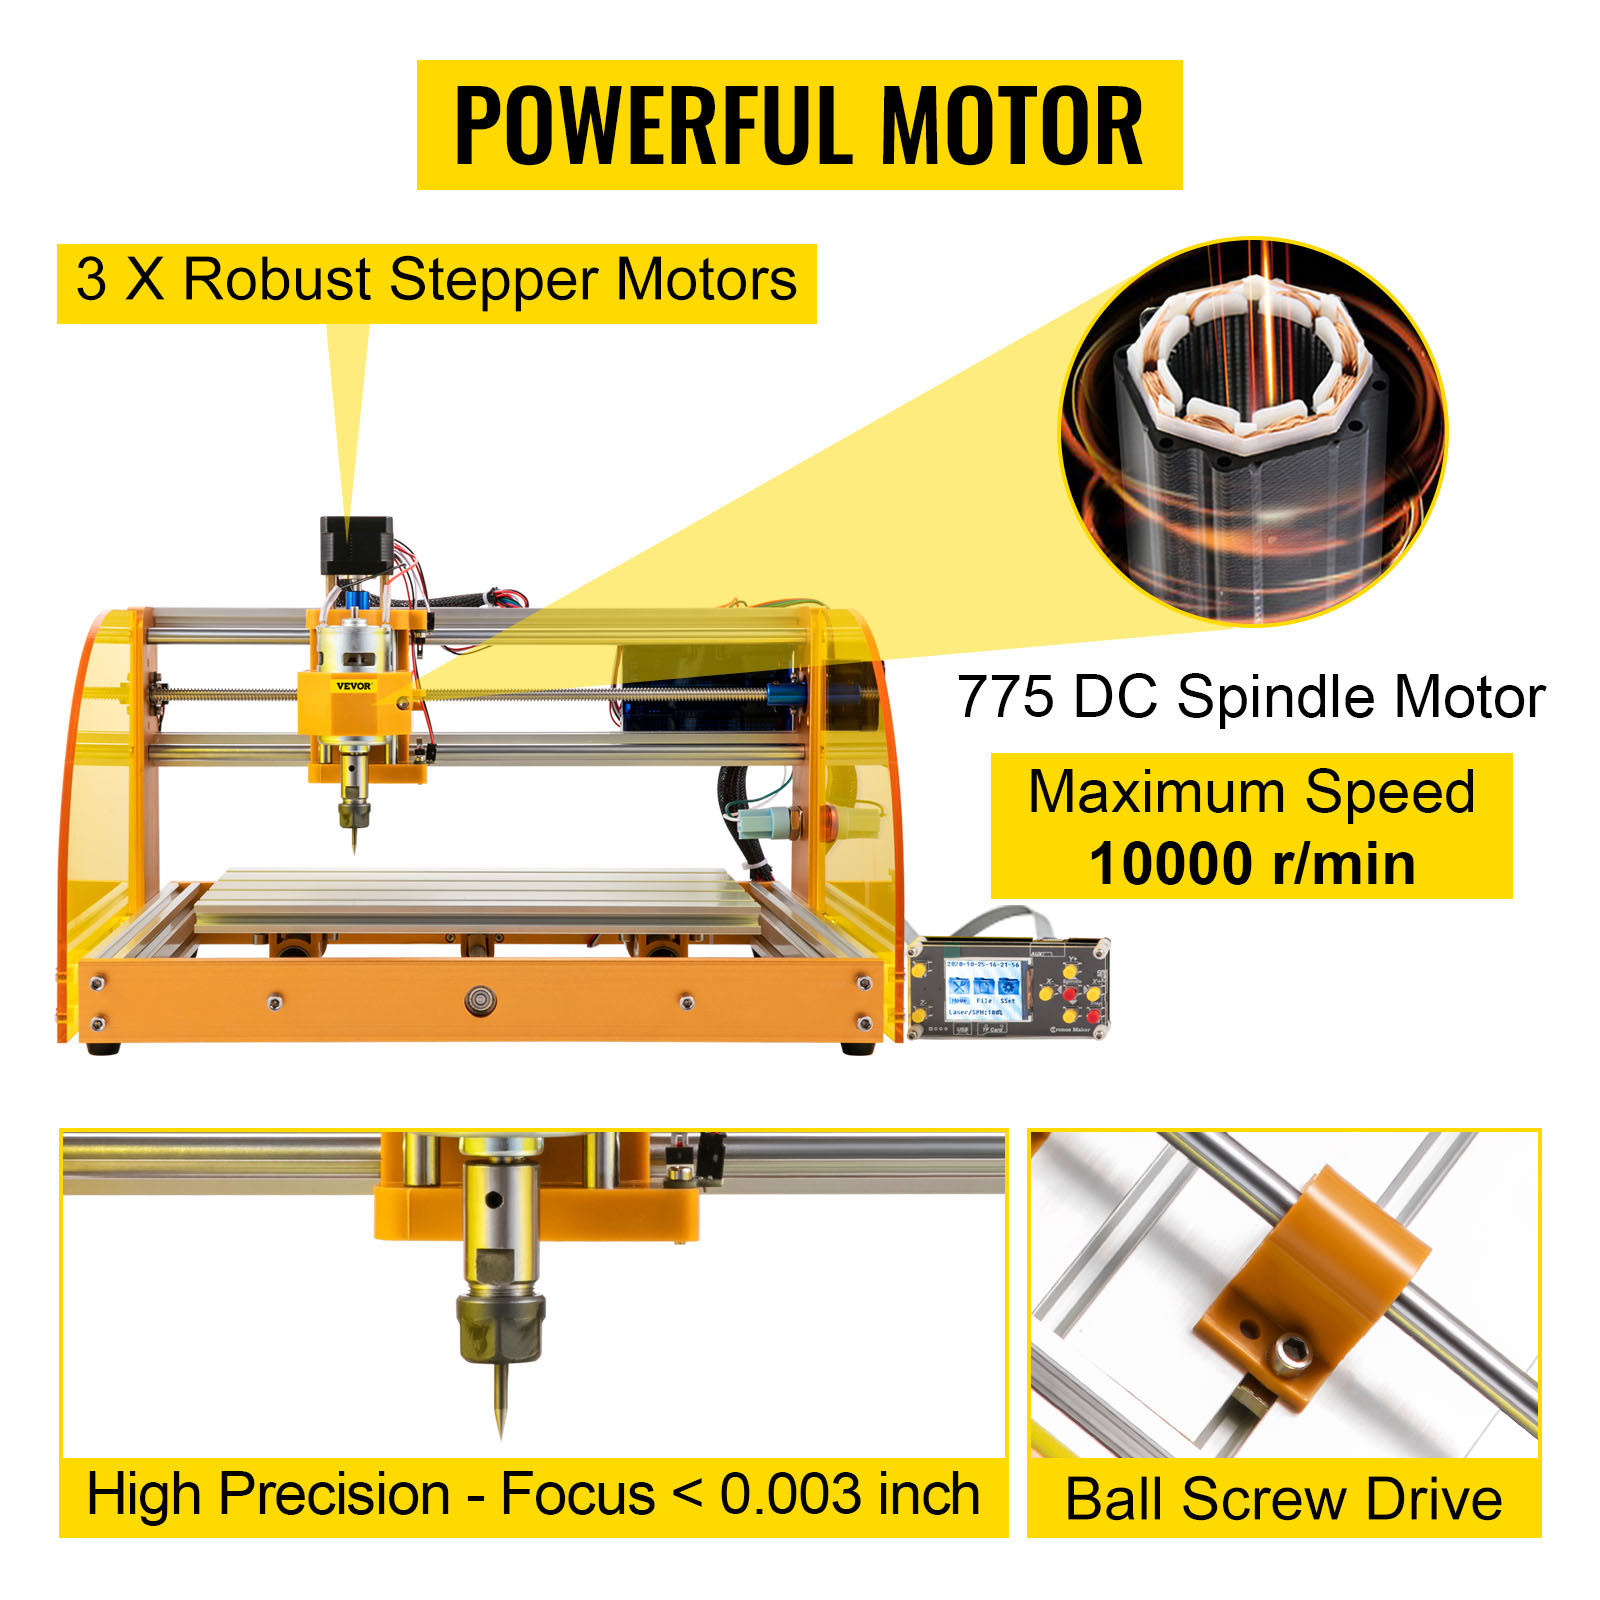 VEVOR CNC 3018-PRO Router Machine 3 Axis GRBL Control with Offline  Controller Plastic Acrylic PCB PVC Wood Carving Milling Engraving Machine  XYZ